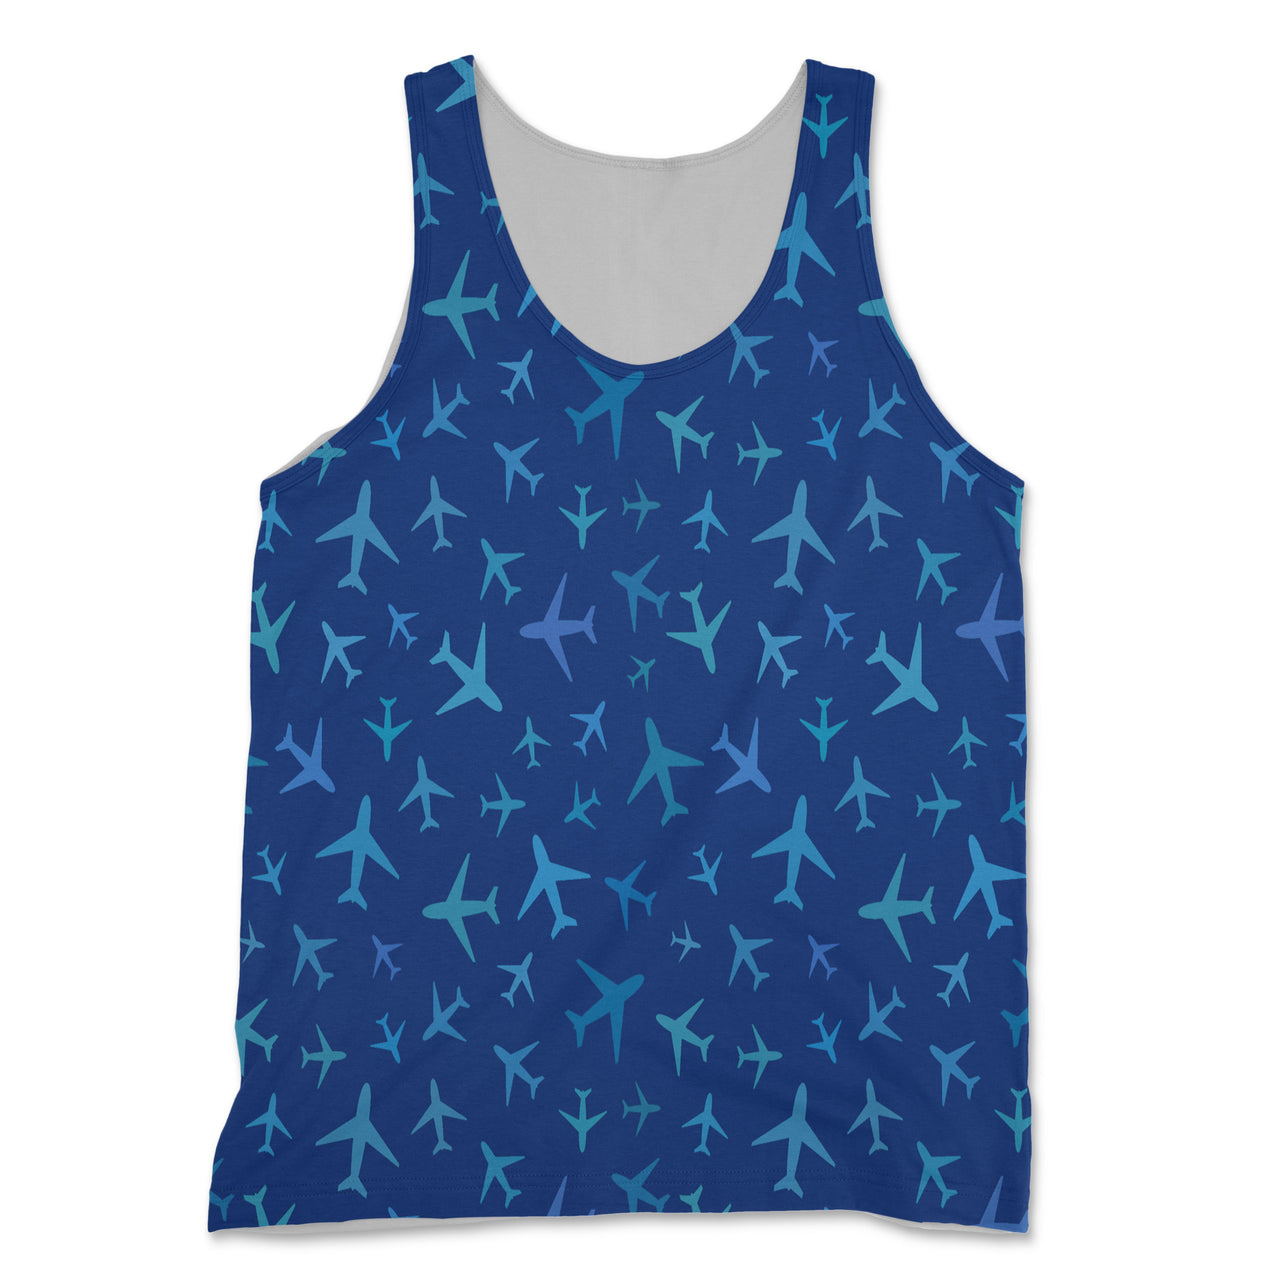 Many Airplanes (Blue) Designed 3D Tank Tops